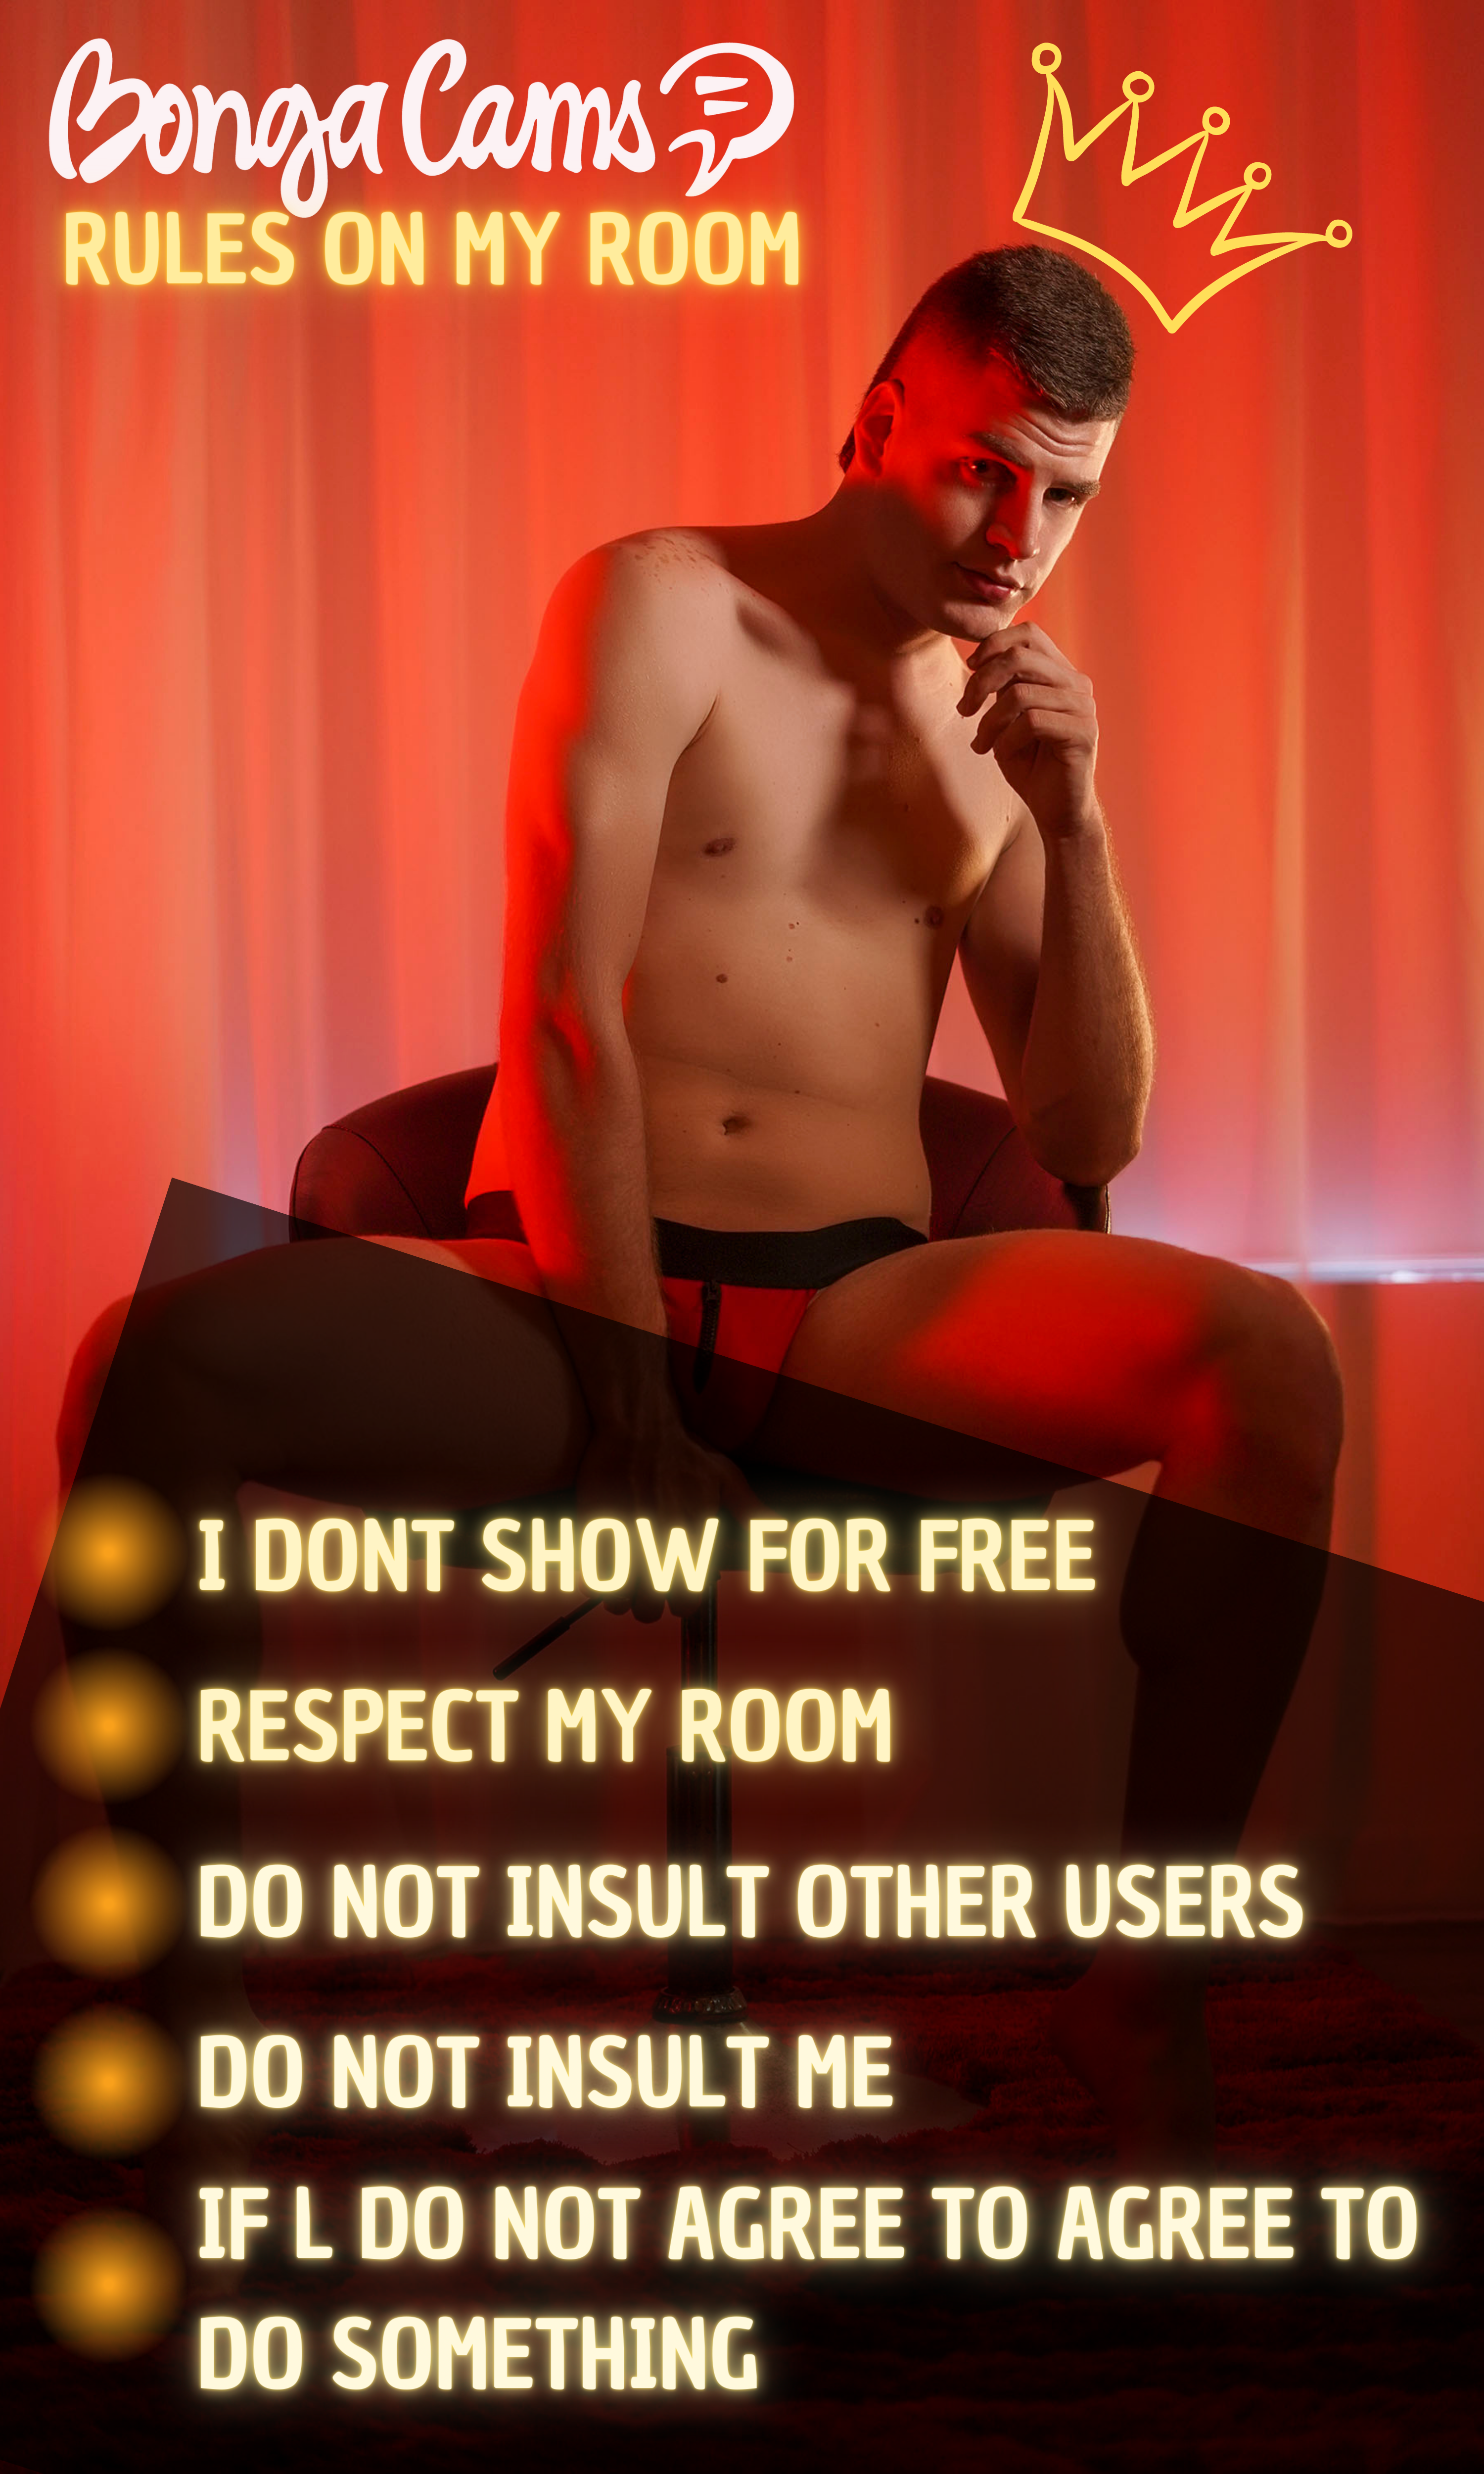 Jogeer-1 rules on my room image: 1